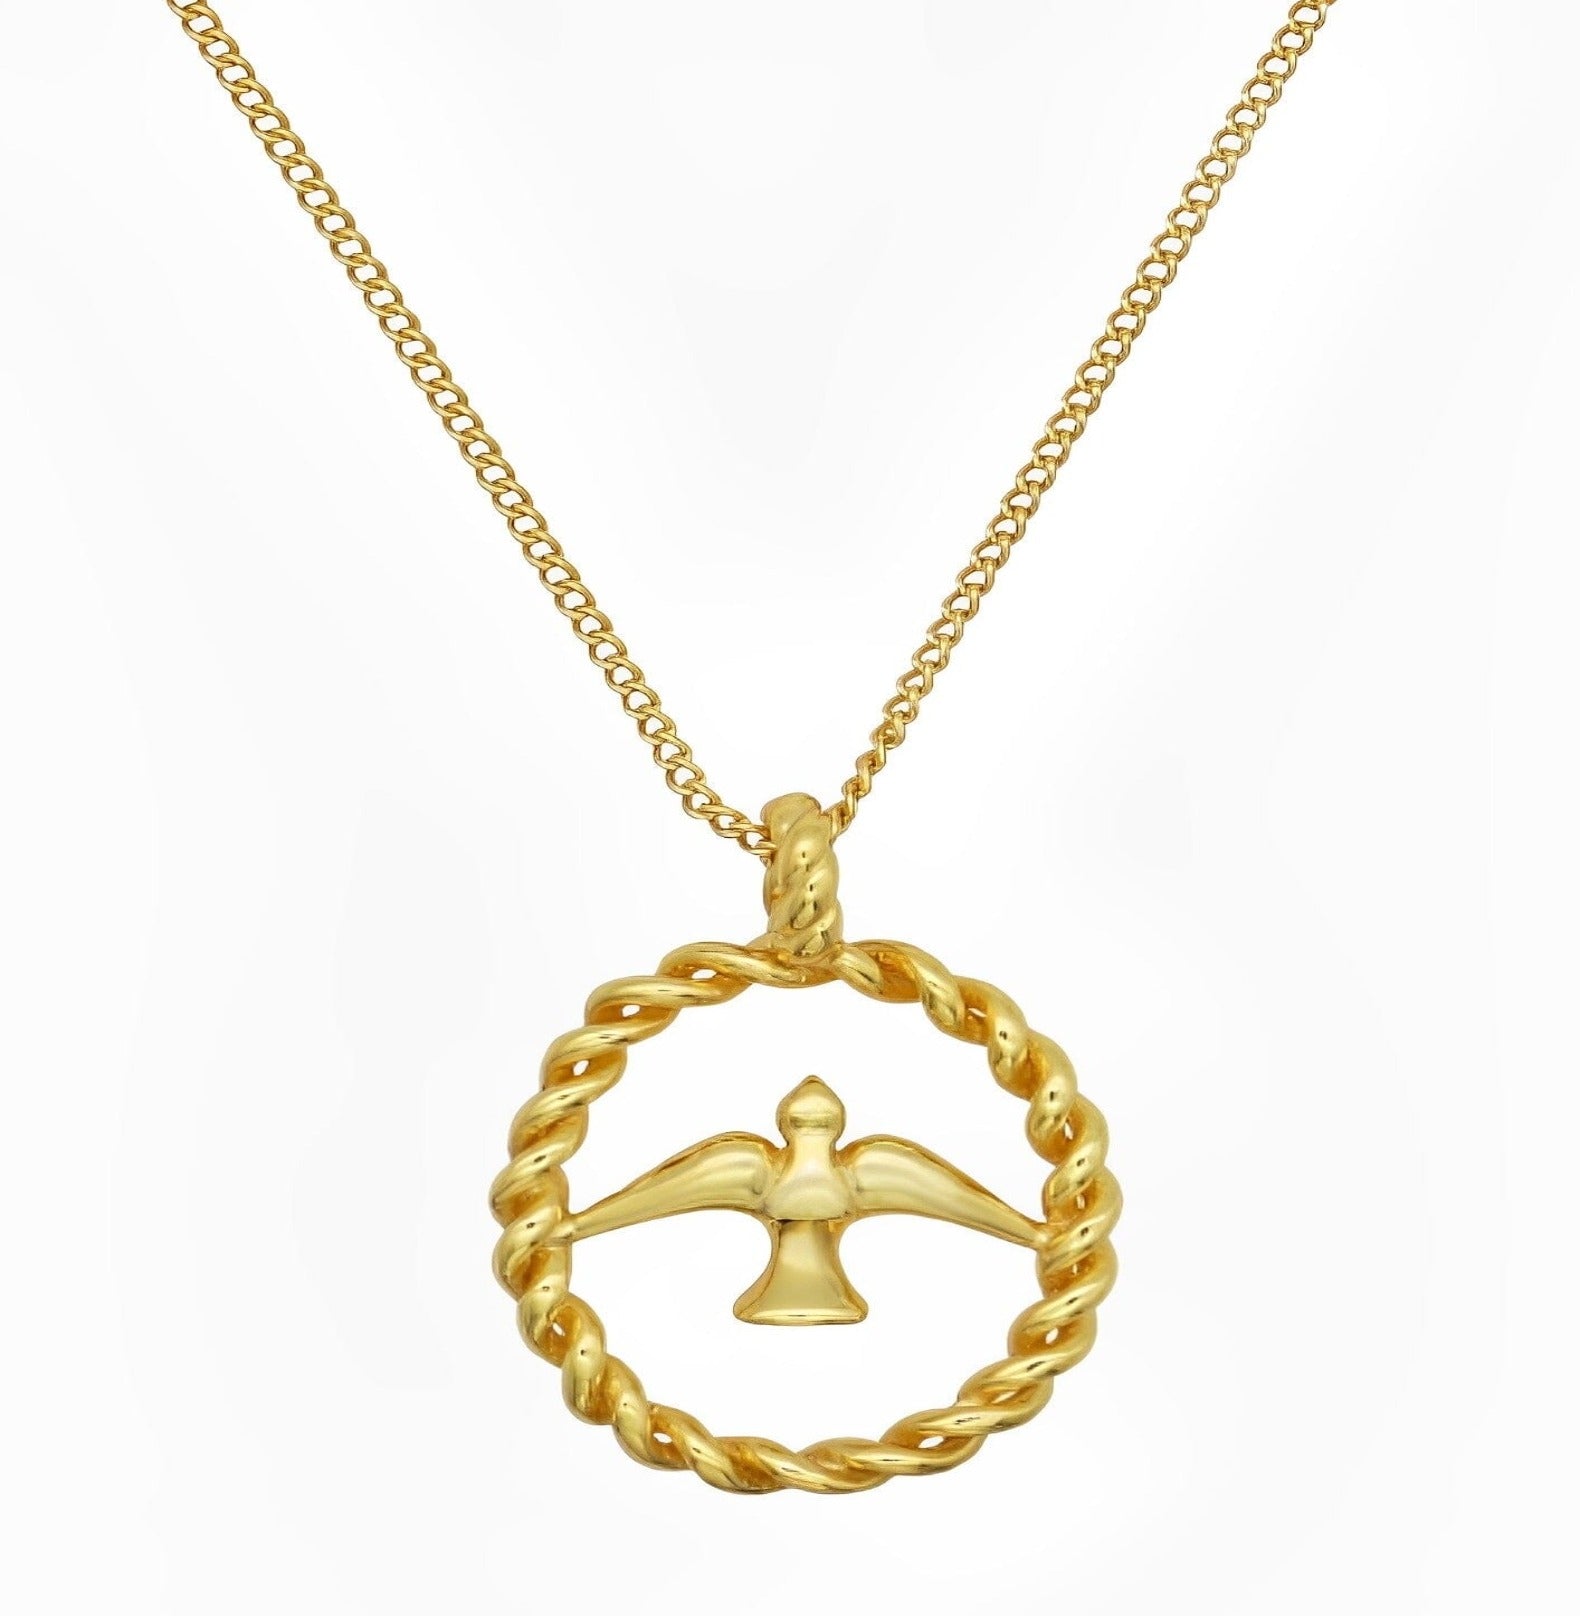 MADELYN NECKLACE neck Yubama Jewelry Online Store - The Elegant Designs of Gold and Silver ! 